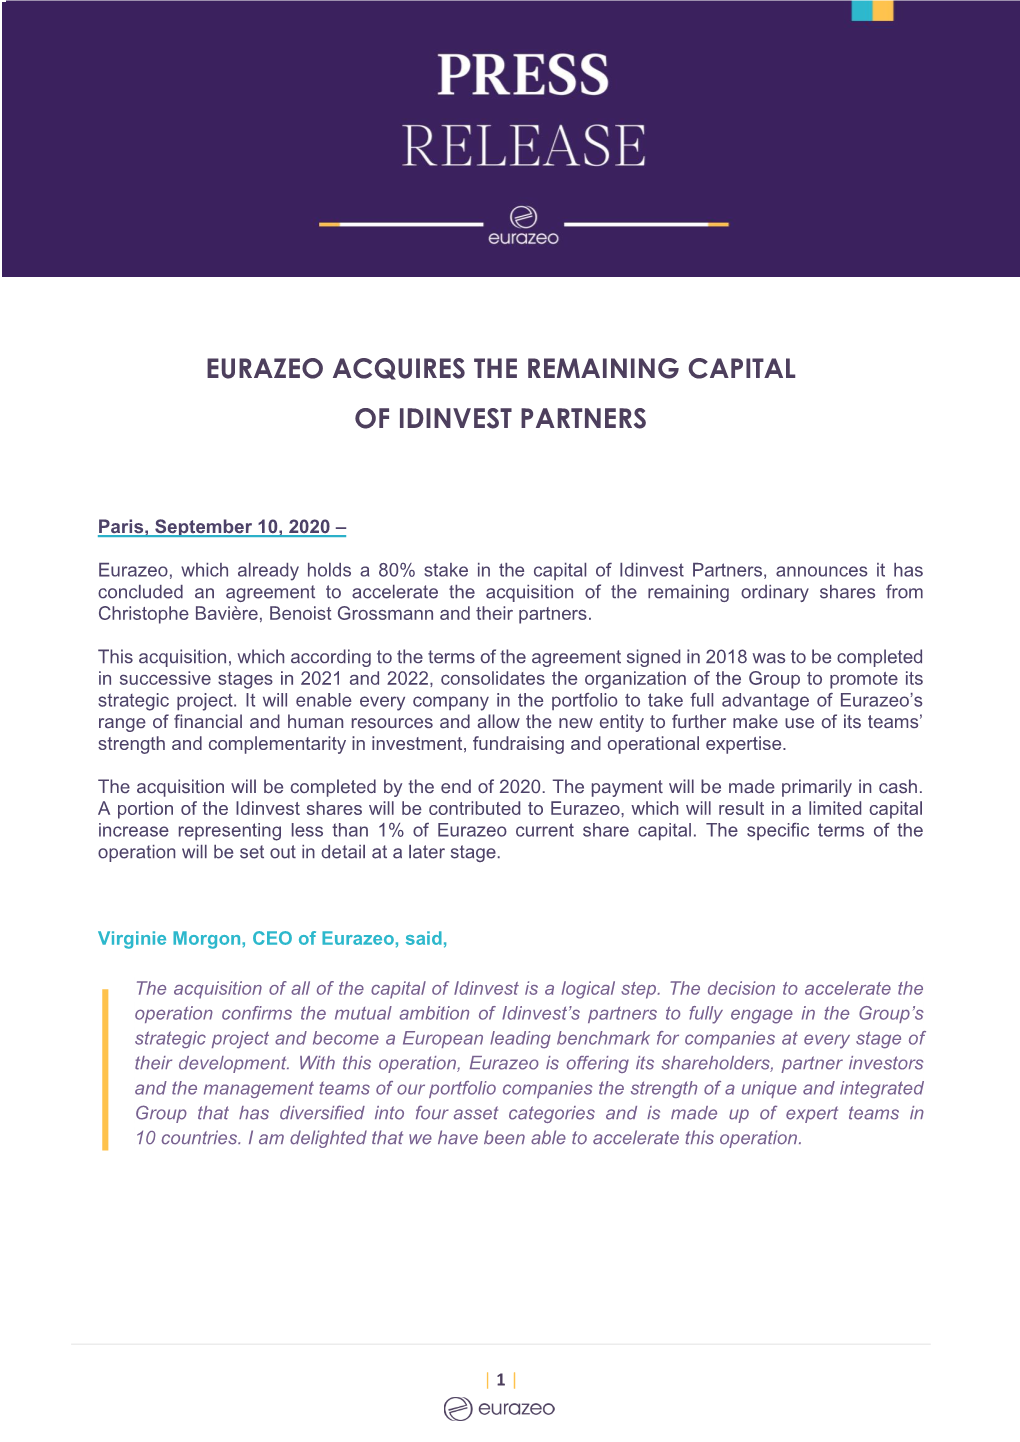 Eurazeo Acquires the Remaining Capital of Idinvest Partners